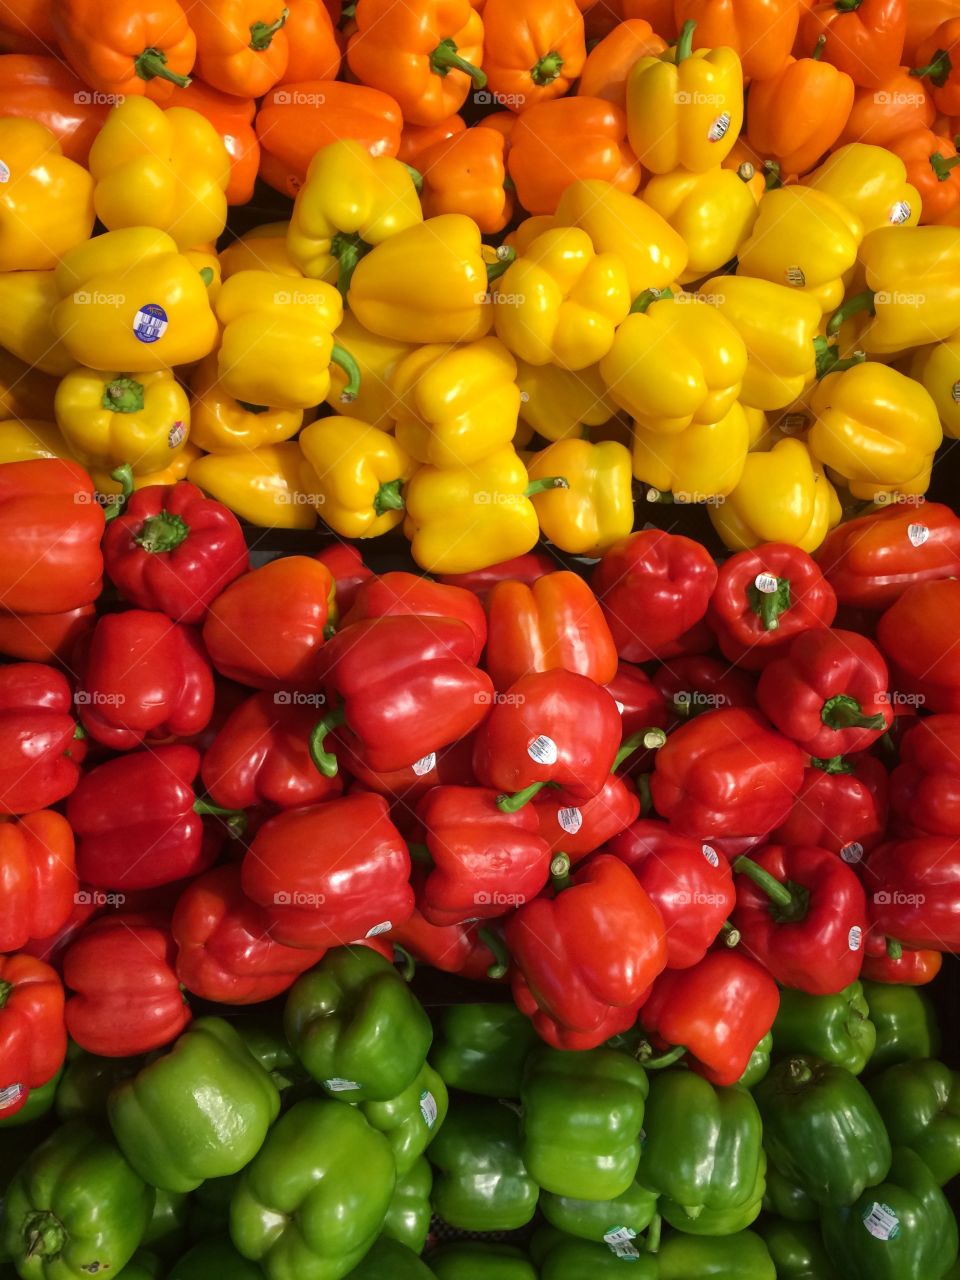 Festive peppers at the market!